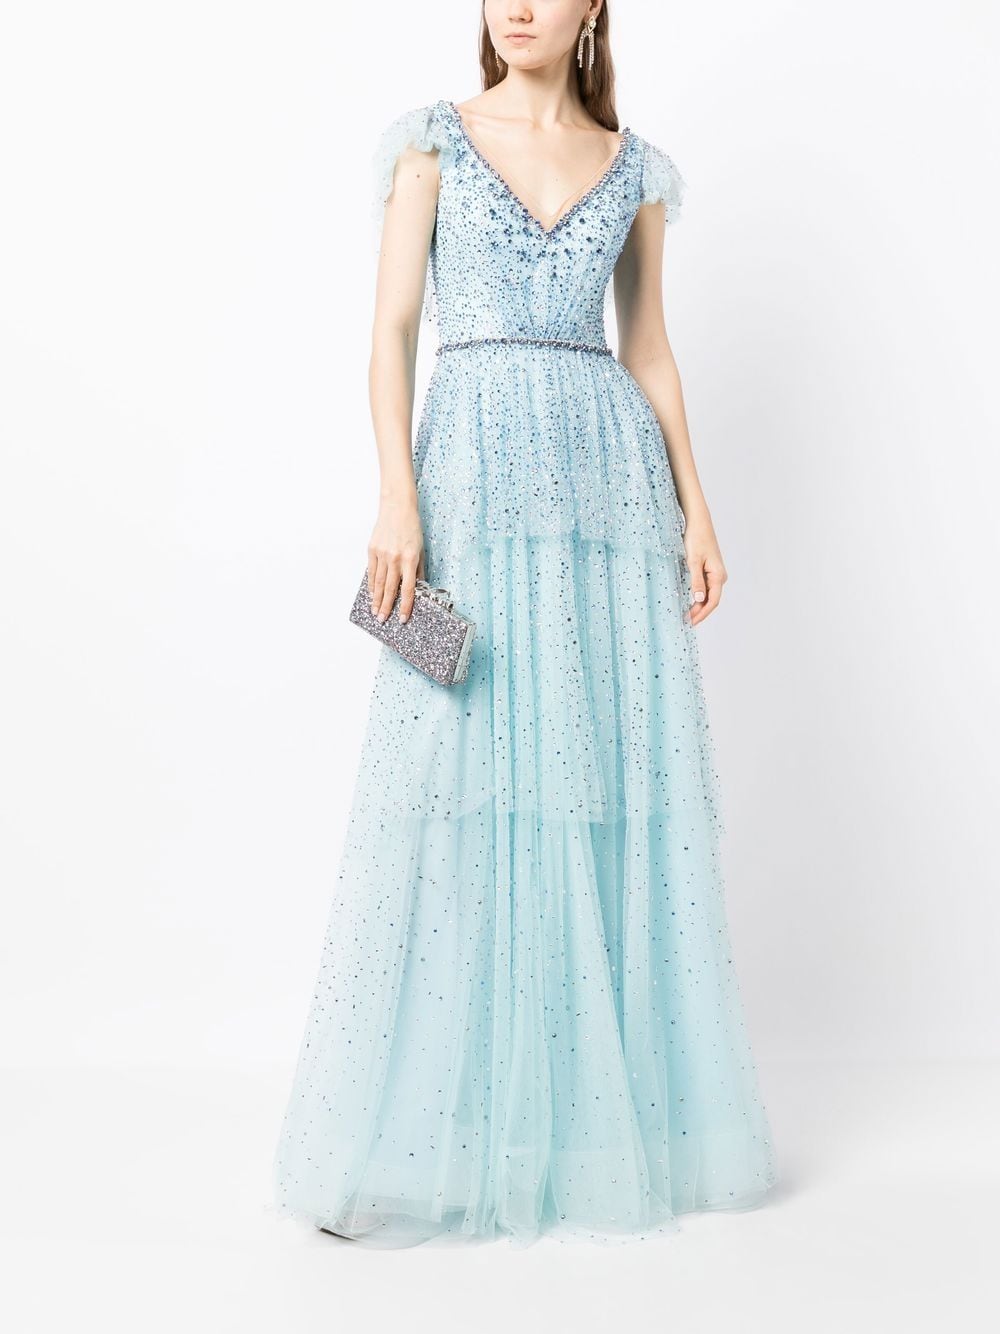 Jenny Packham Sequin Embellished Tulle Gown - Farfetch